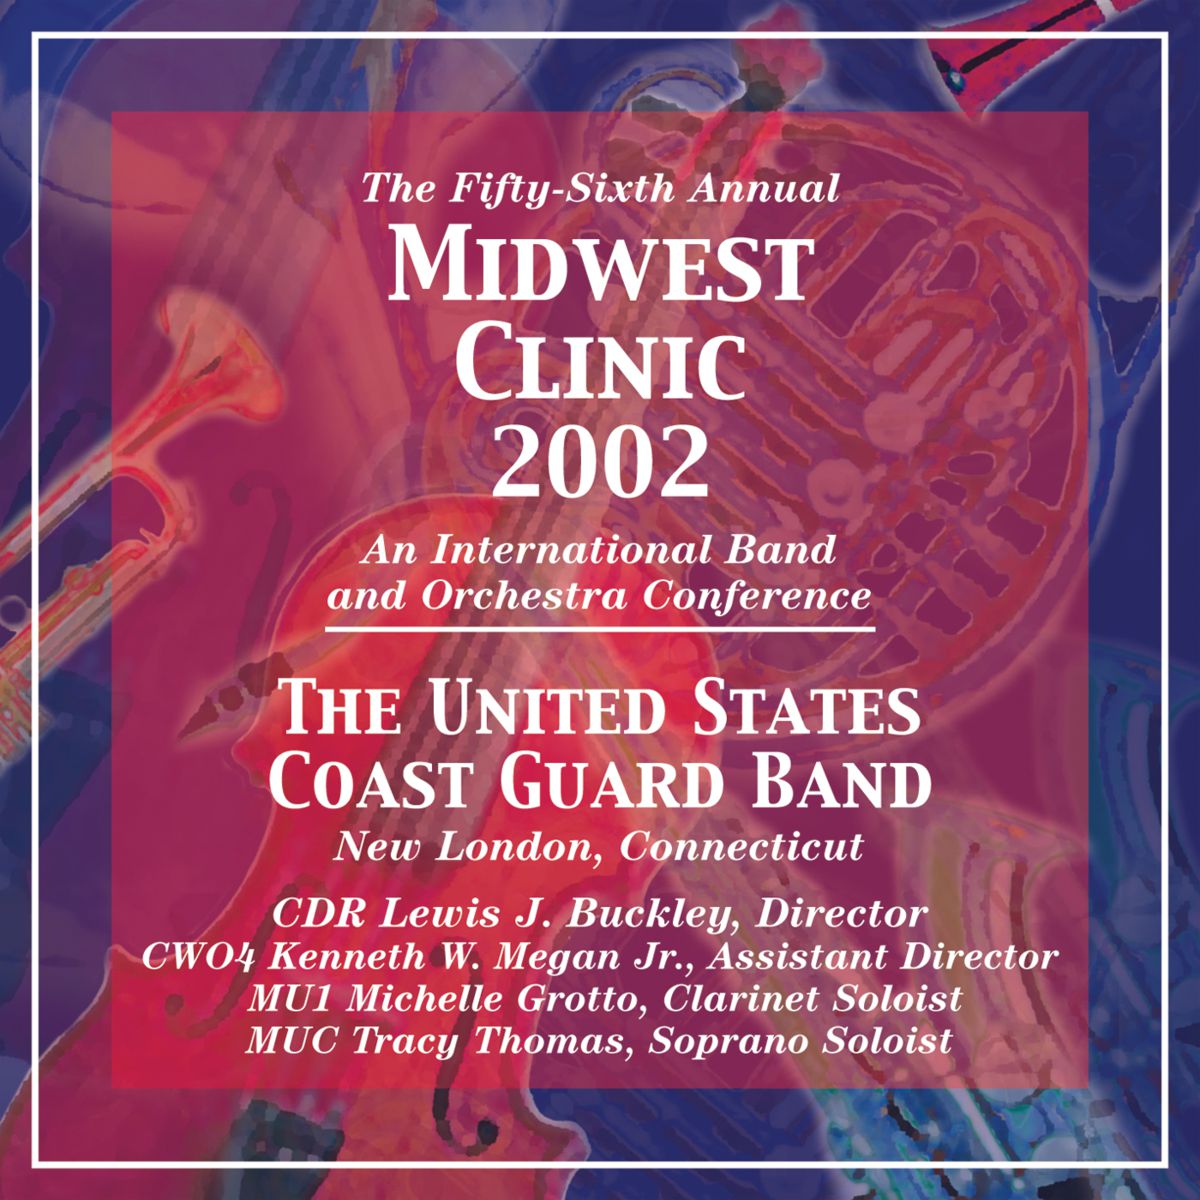 2002 Midwest Clinic: The United States Coast Guard Band - klik hier